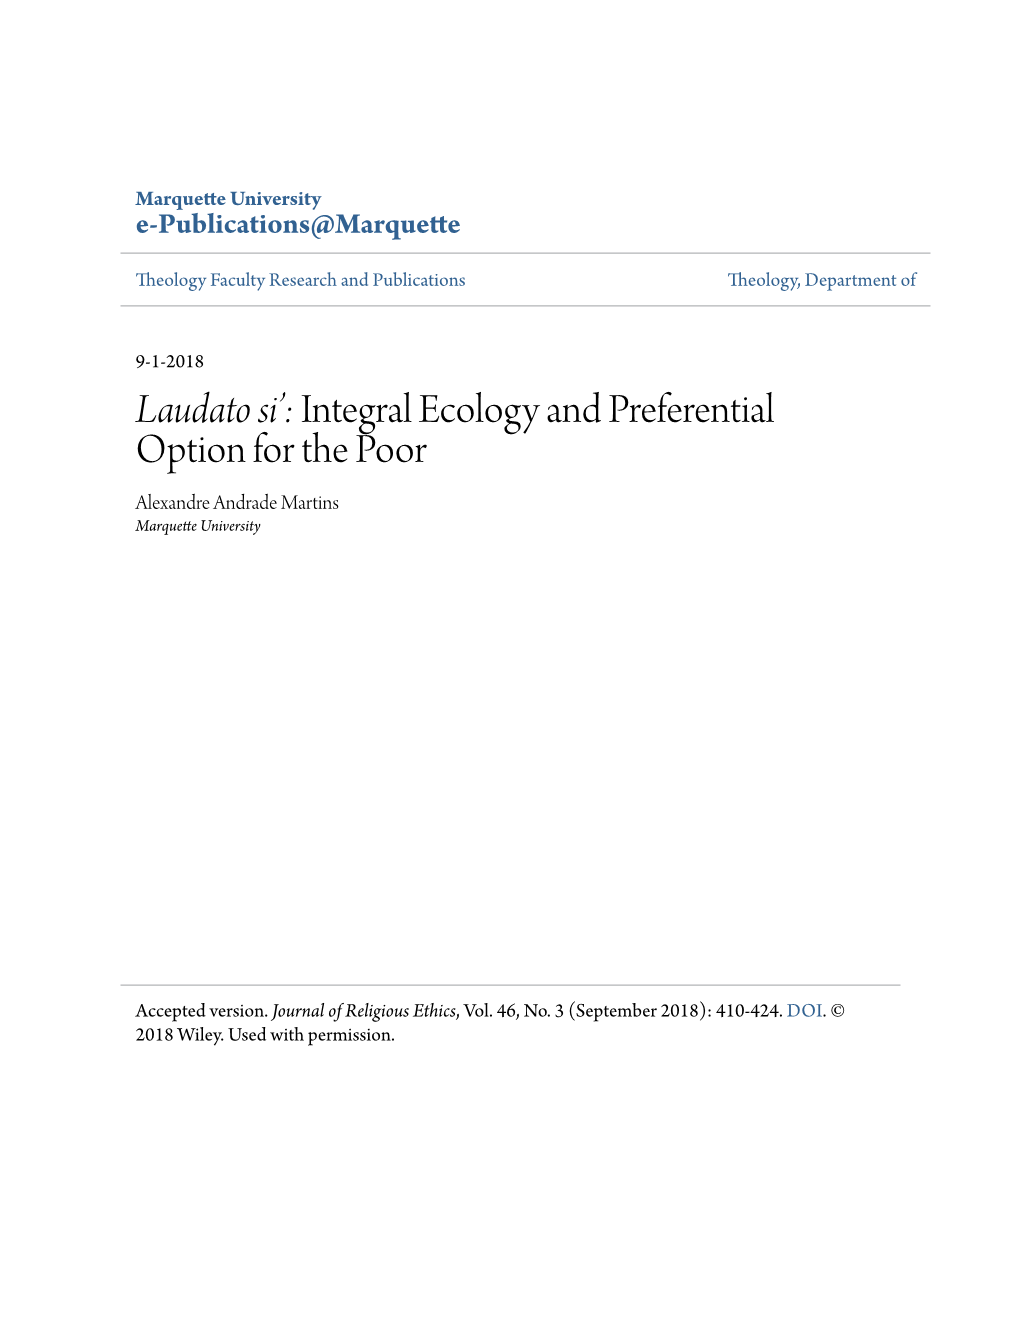 Integral Ecology and Preferential Option for the Poor Alexandre Andrade Martins Marquette University